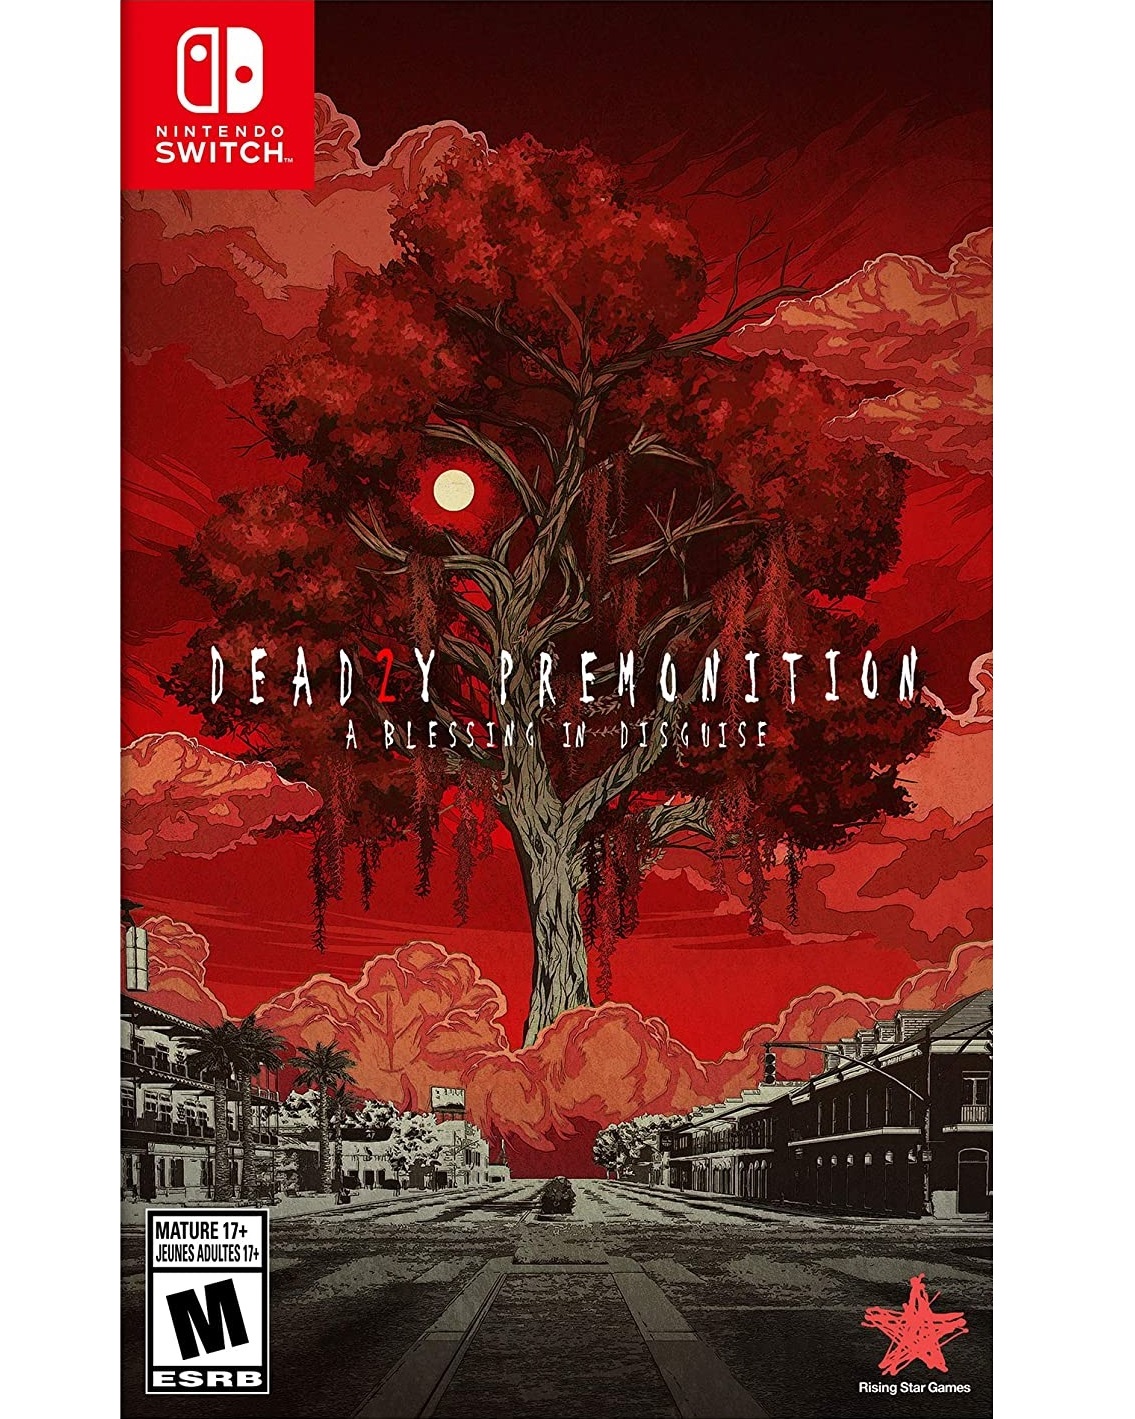 deadly premonition 2 blessing in disguise download free